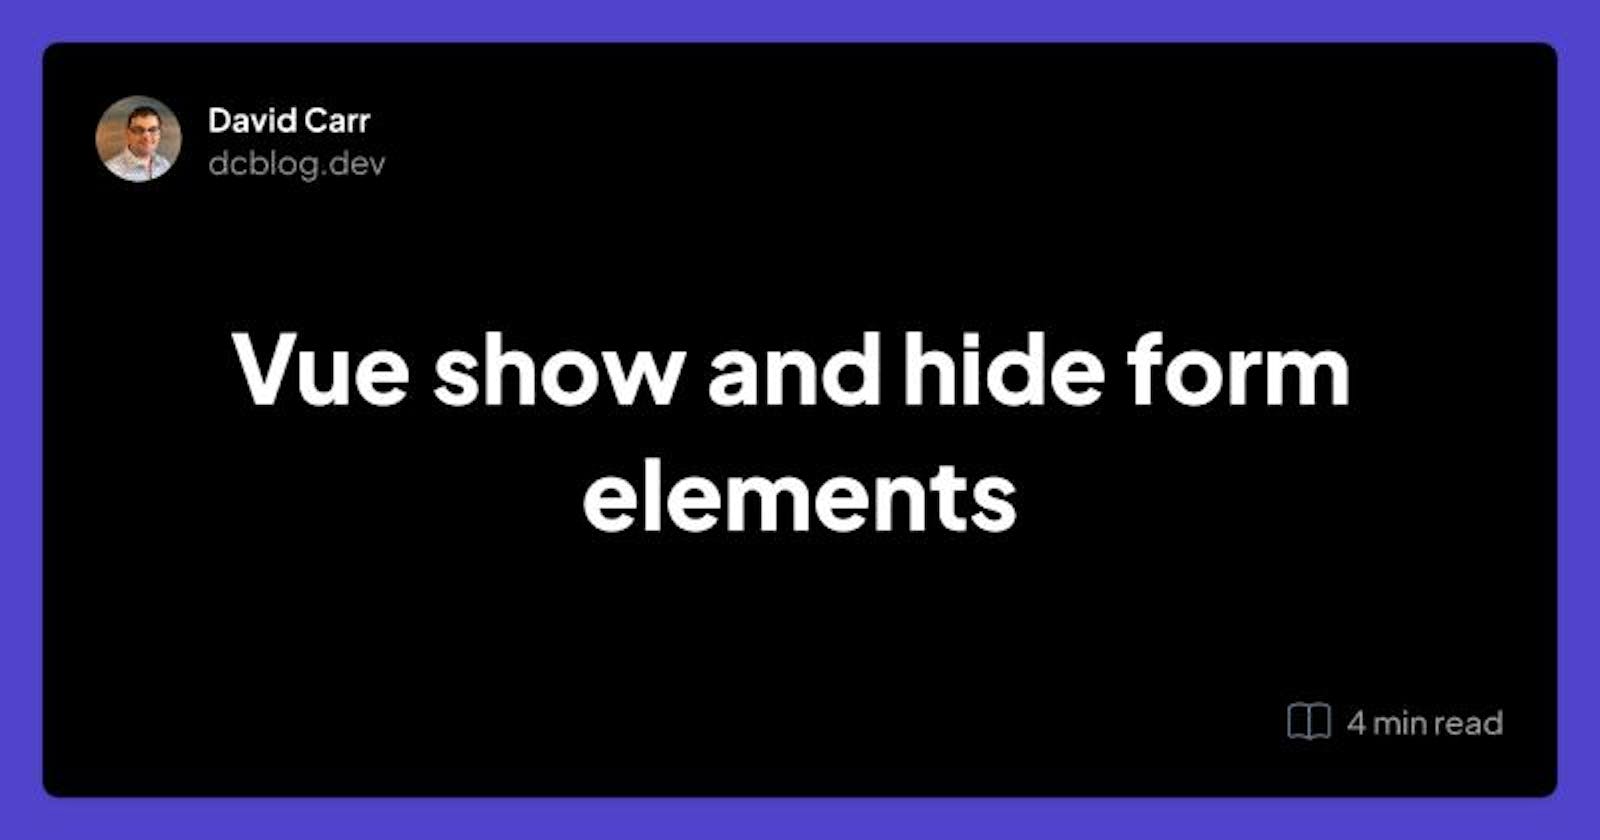 Vue show and hide form elements